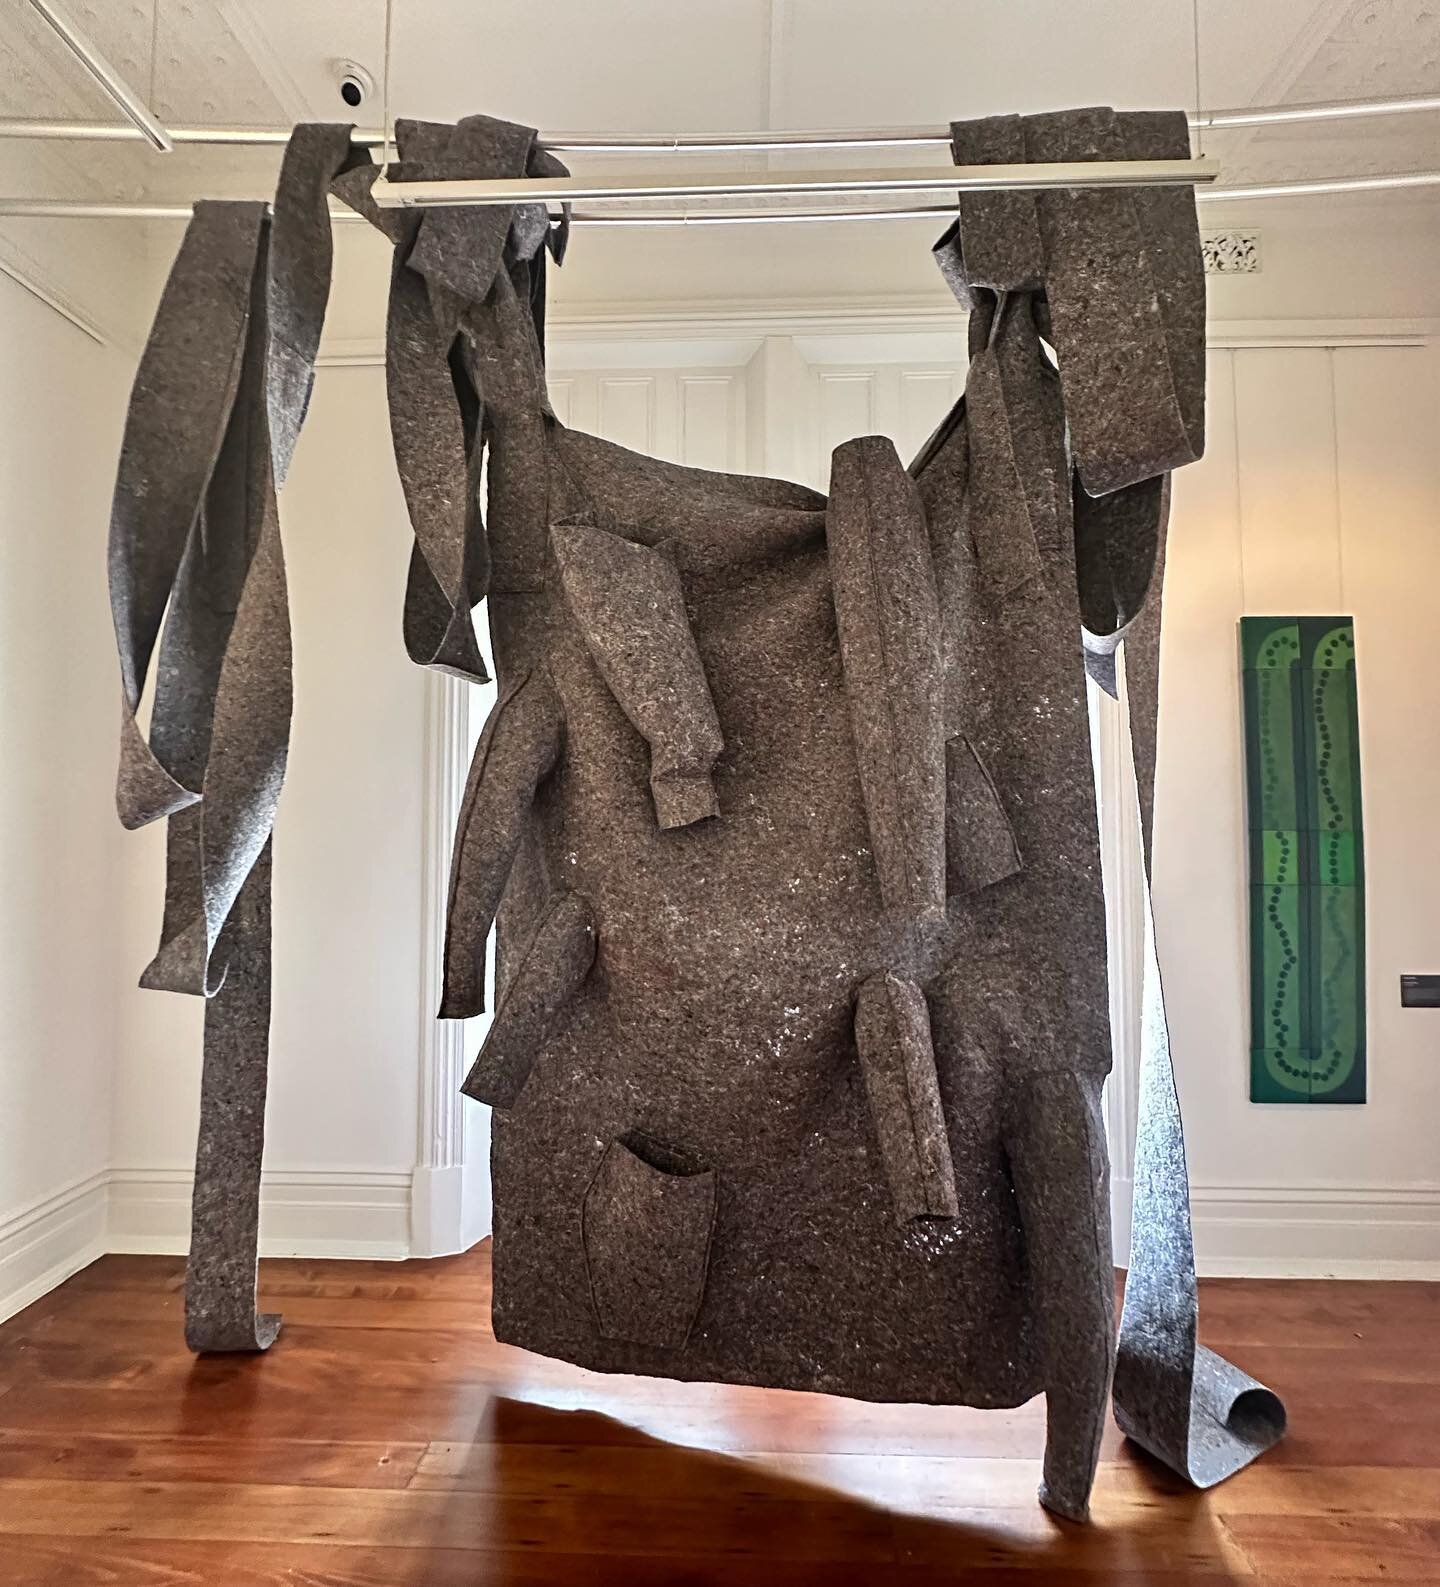 Helvi Apted, Felt in Time, part of 'Coat of Arms' (series) 2023, manufactured felt, thread, polyester fiberfill, dimensions width 180cm x height 220cm (approx.) x depth 85cm. Enquires welcome.